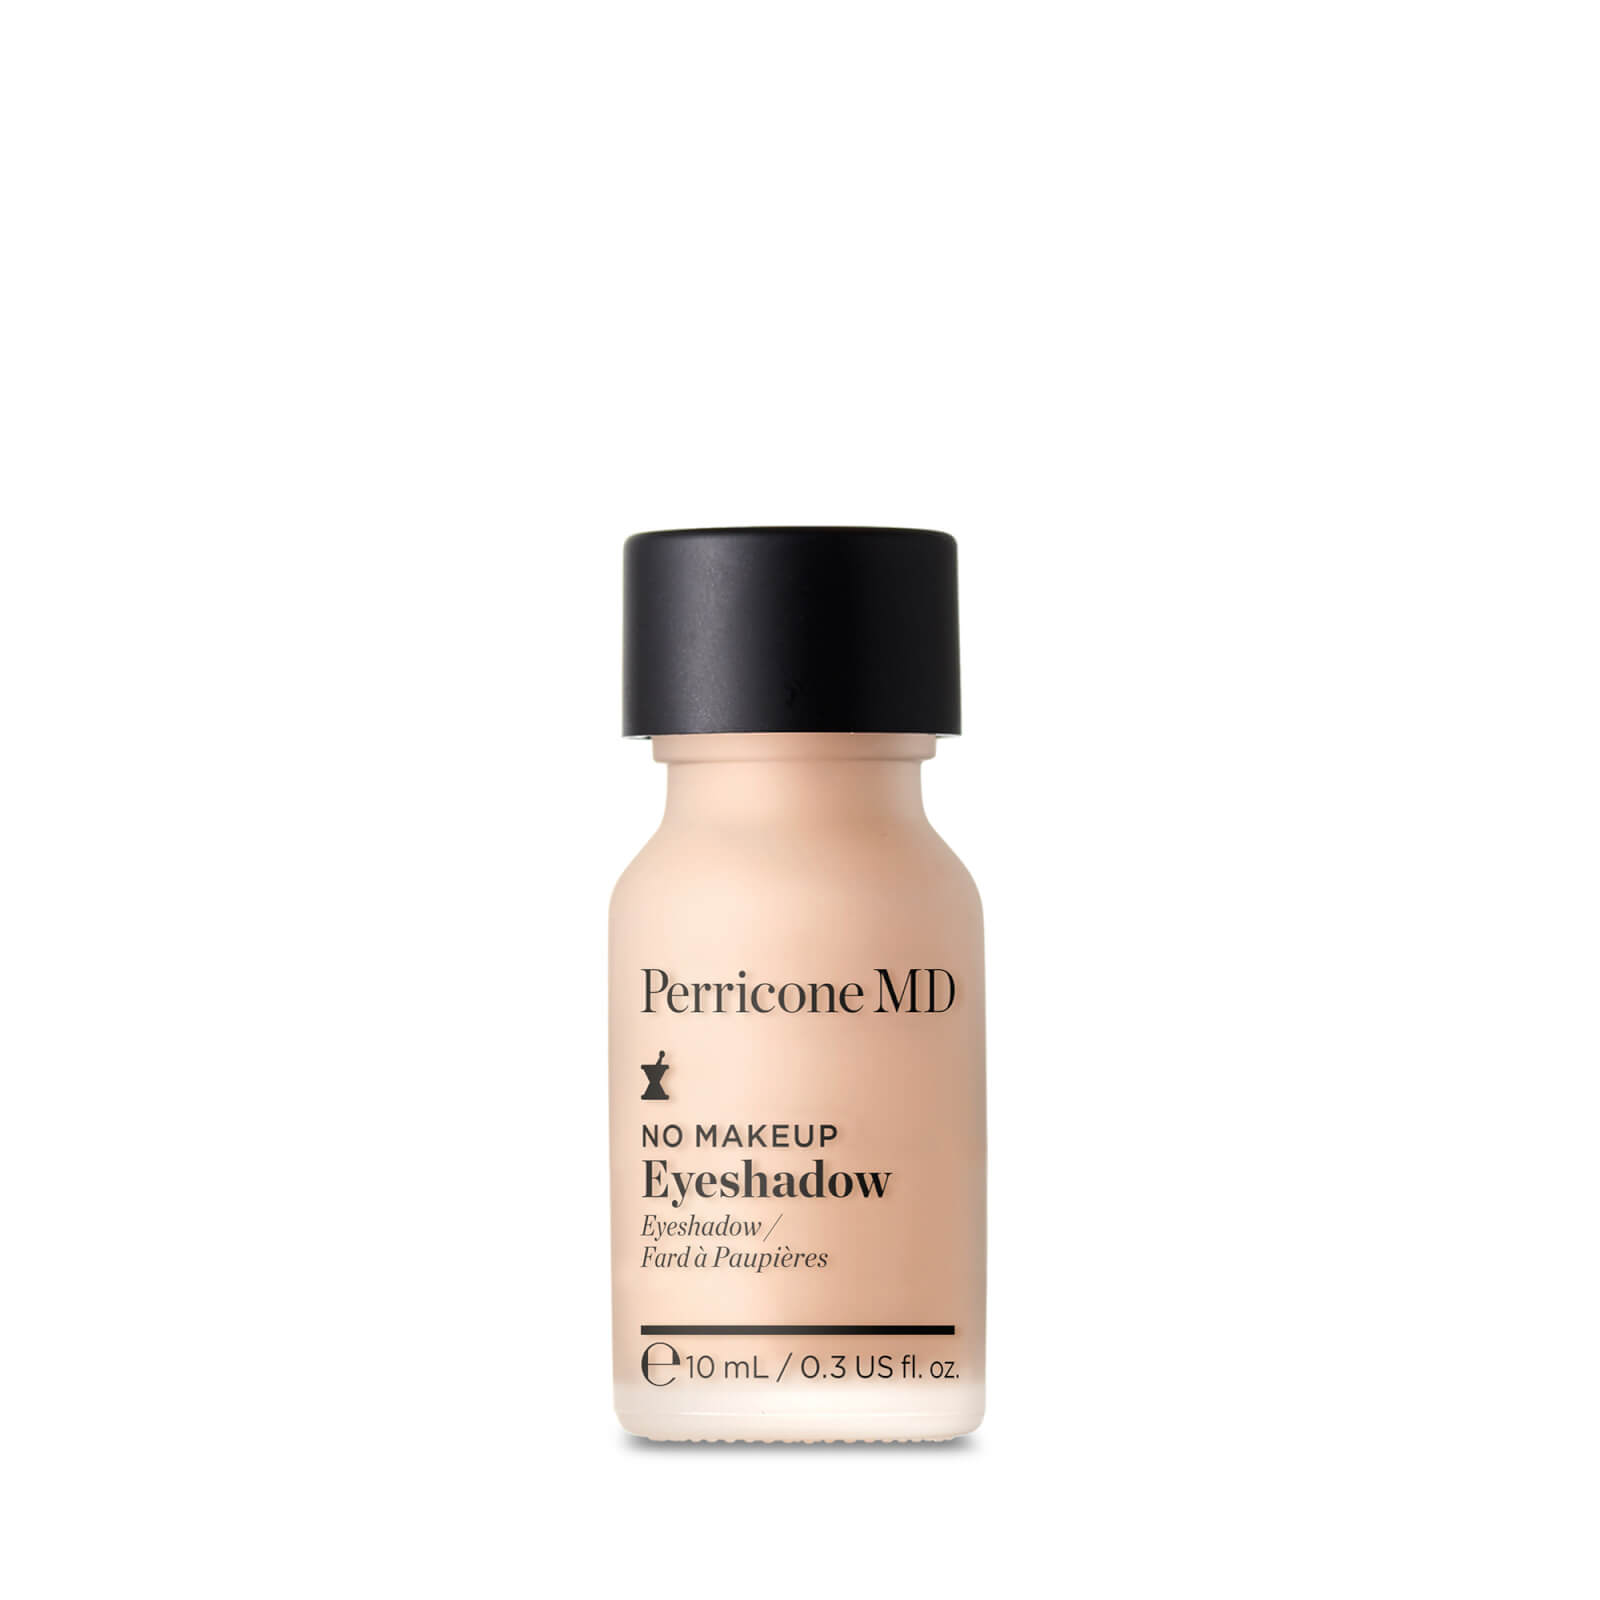 Perricone Md No Makeup Eyeshadow - Shade 1 In Neutral